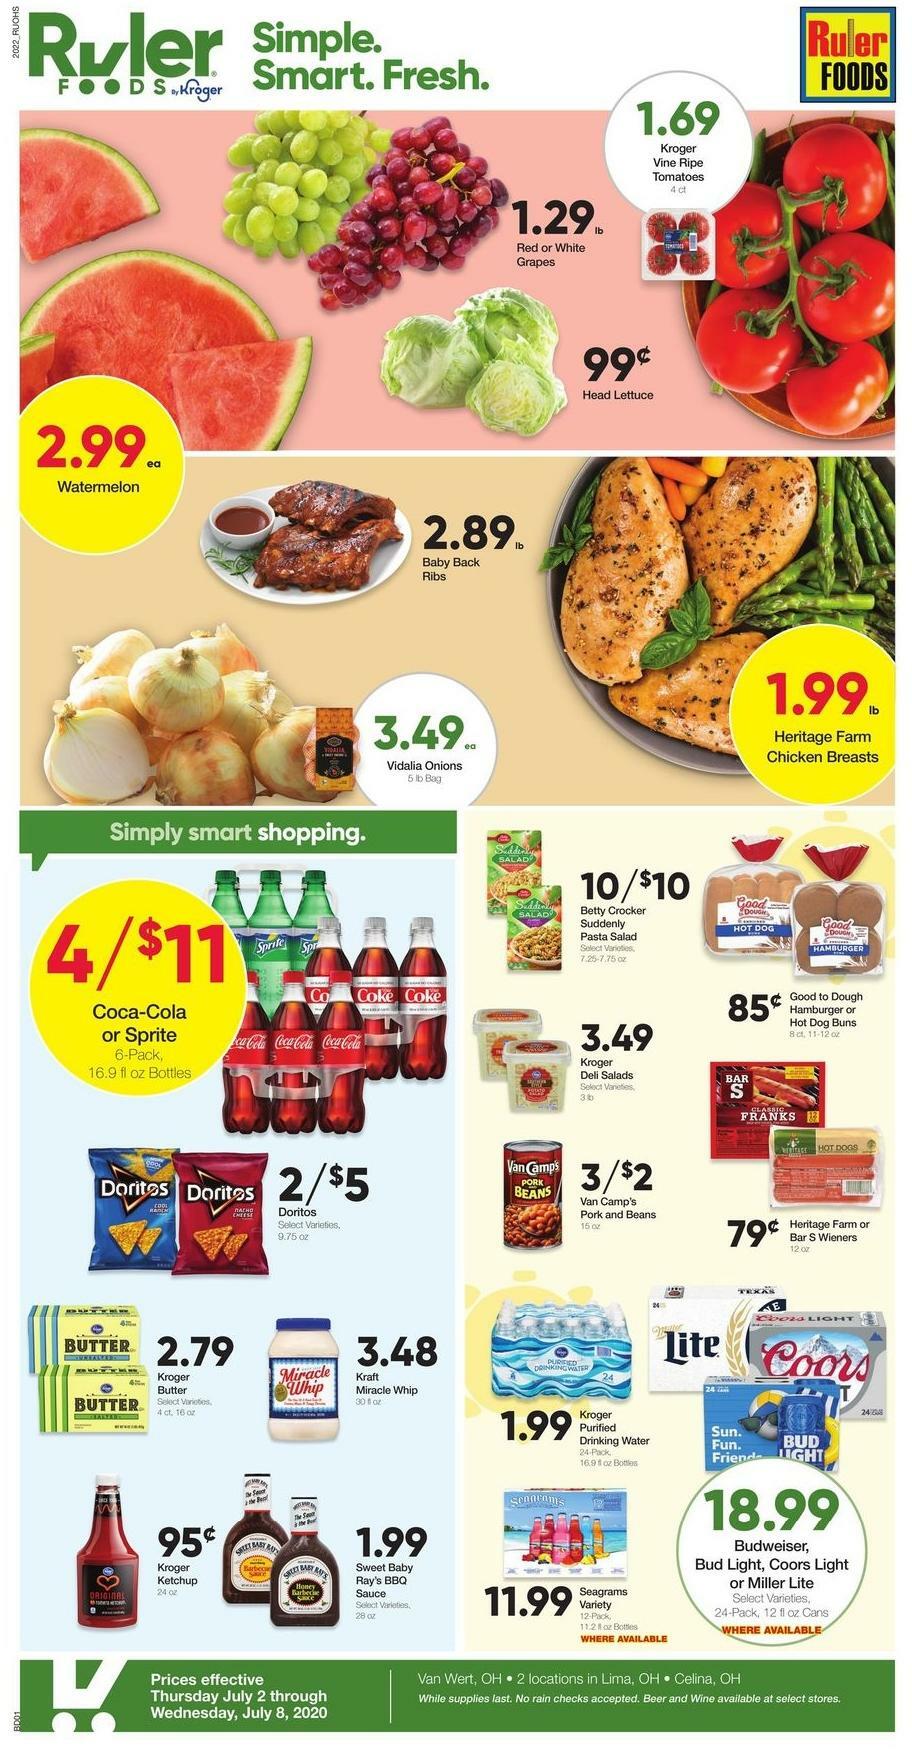 Ruler Foods Weekly Ad from July 2